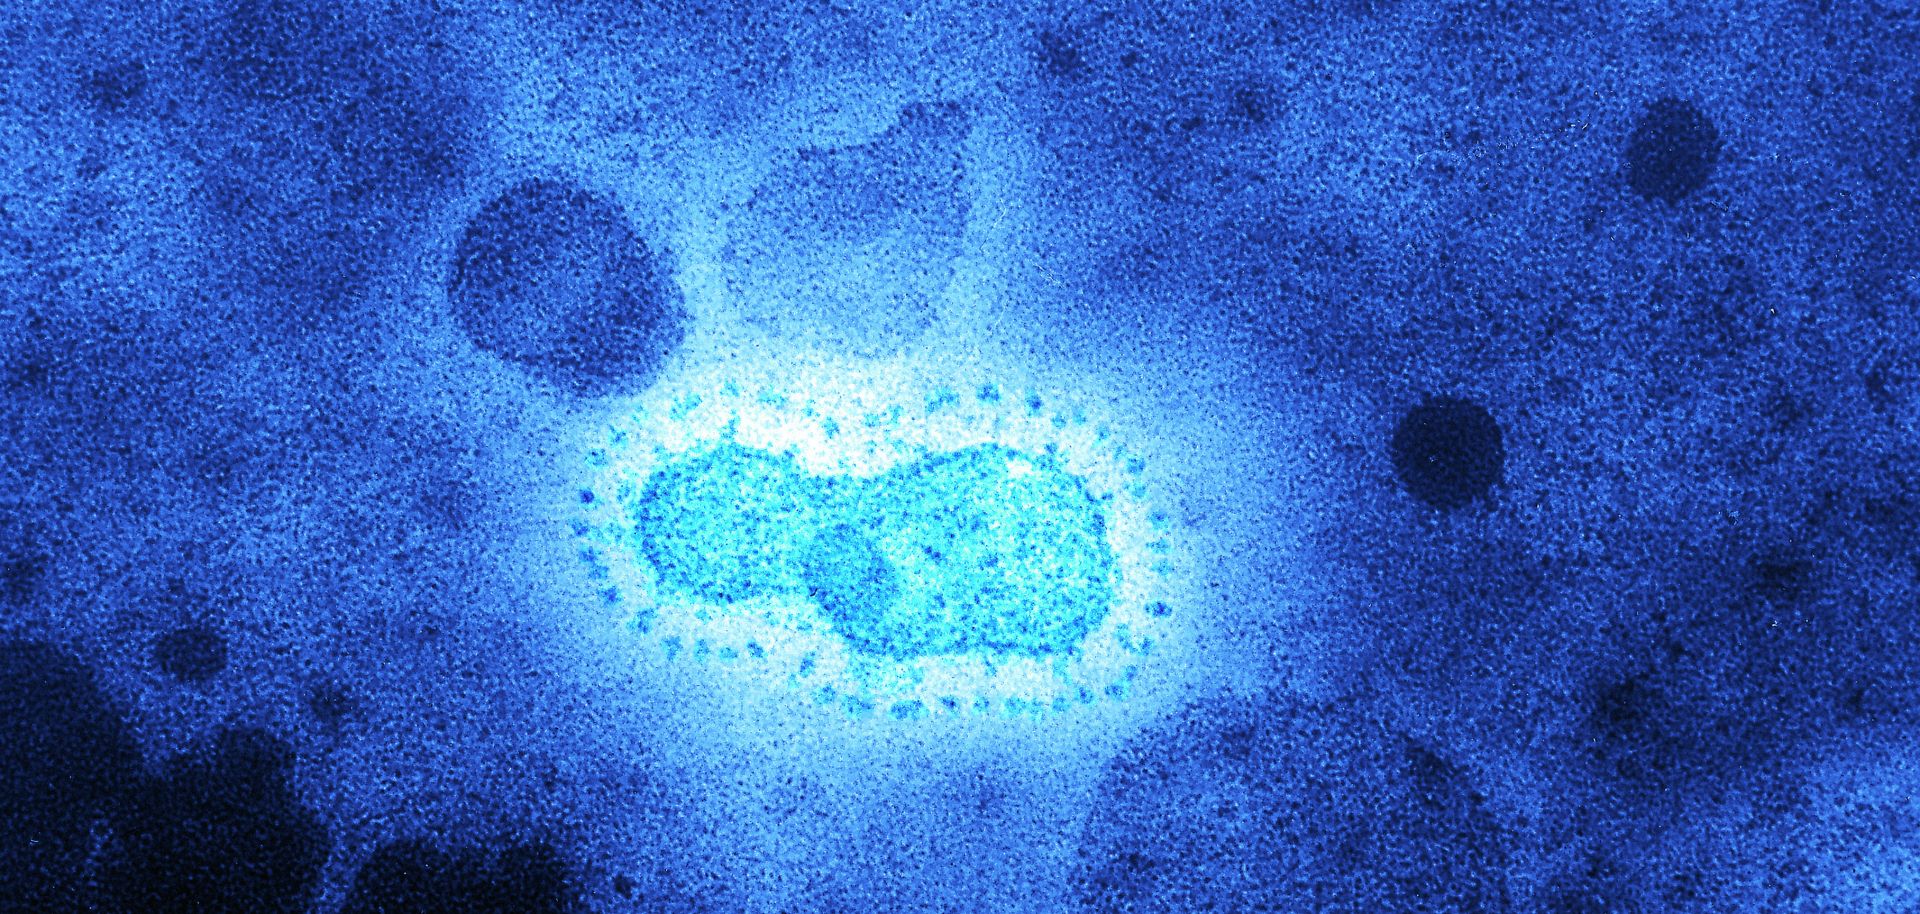 The crown shape of this virus, as shown in a tinted transmission from electron microscopy, gives the coronavirus its name.